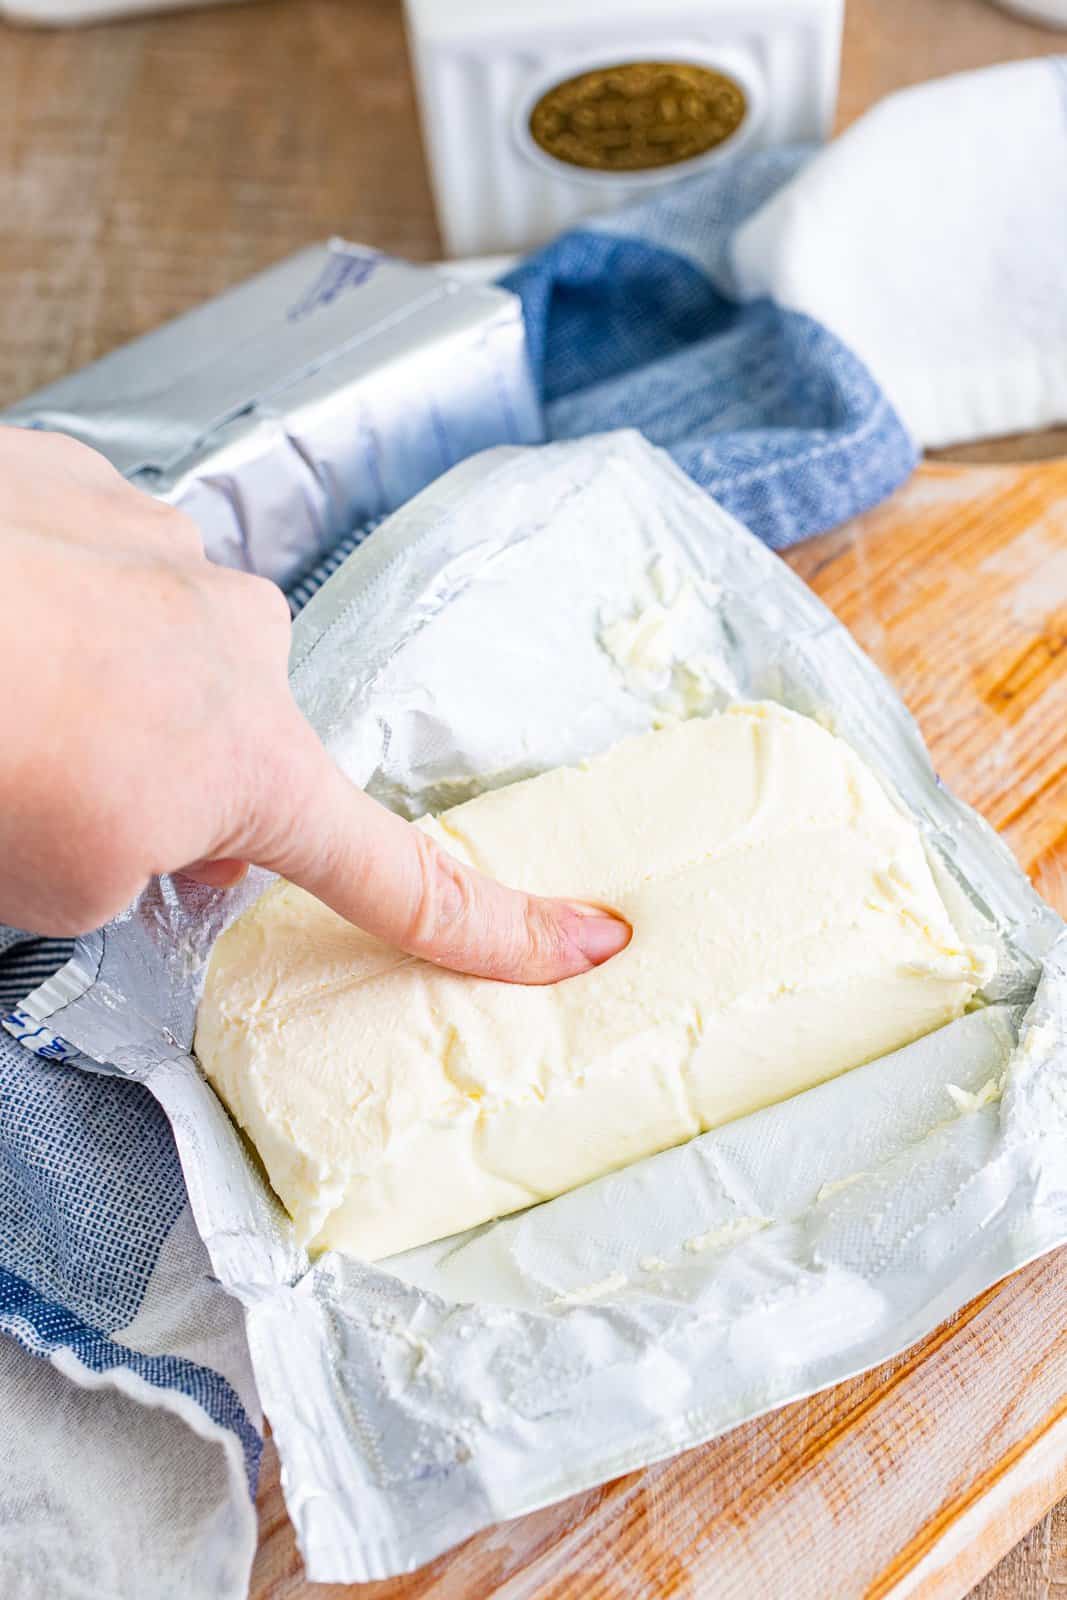 A hand squishing a block of Cream Cheese.